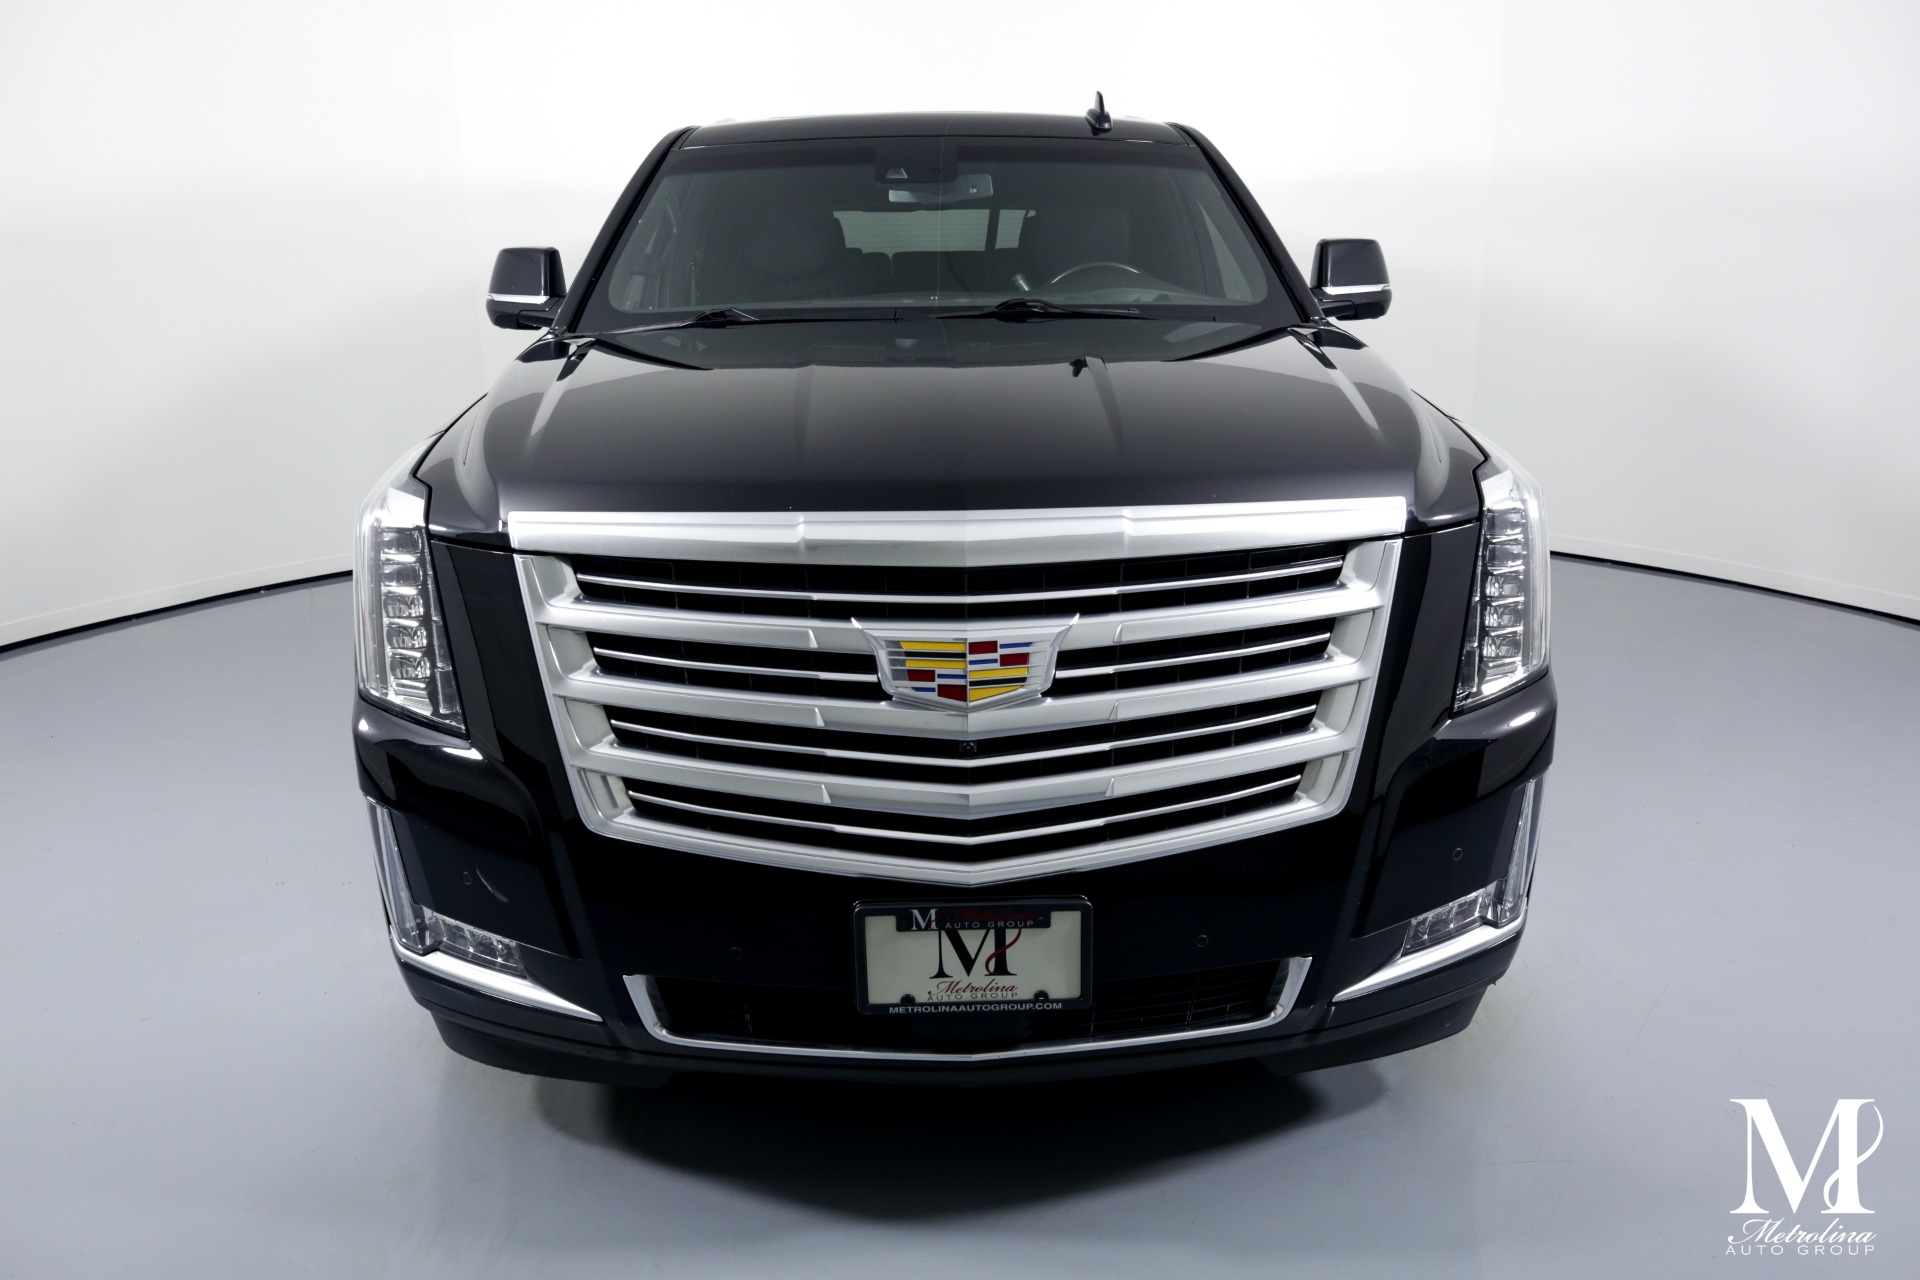 Used 2015 Cadillac Escalade Platinum for sale $49,995 at Metrolina Auto Group in Charlotte NC 28217 - 3